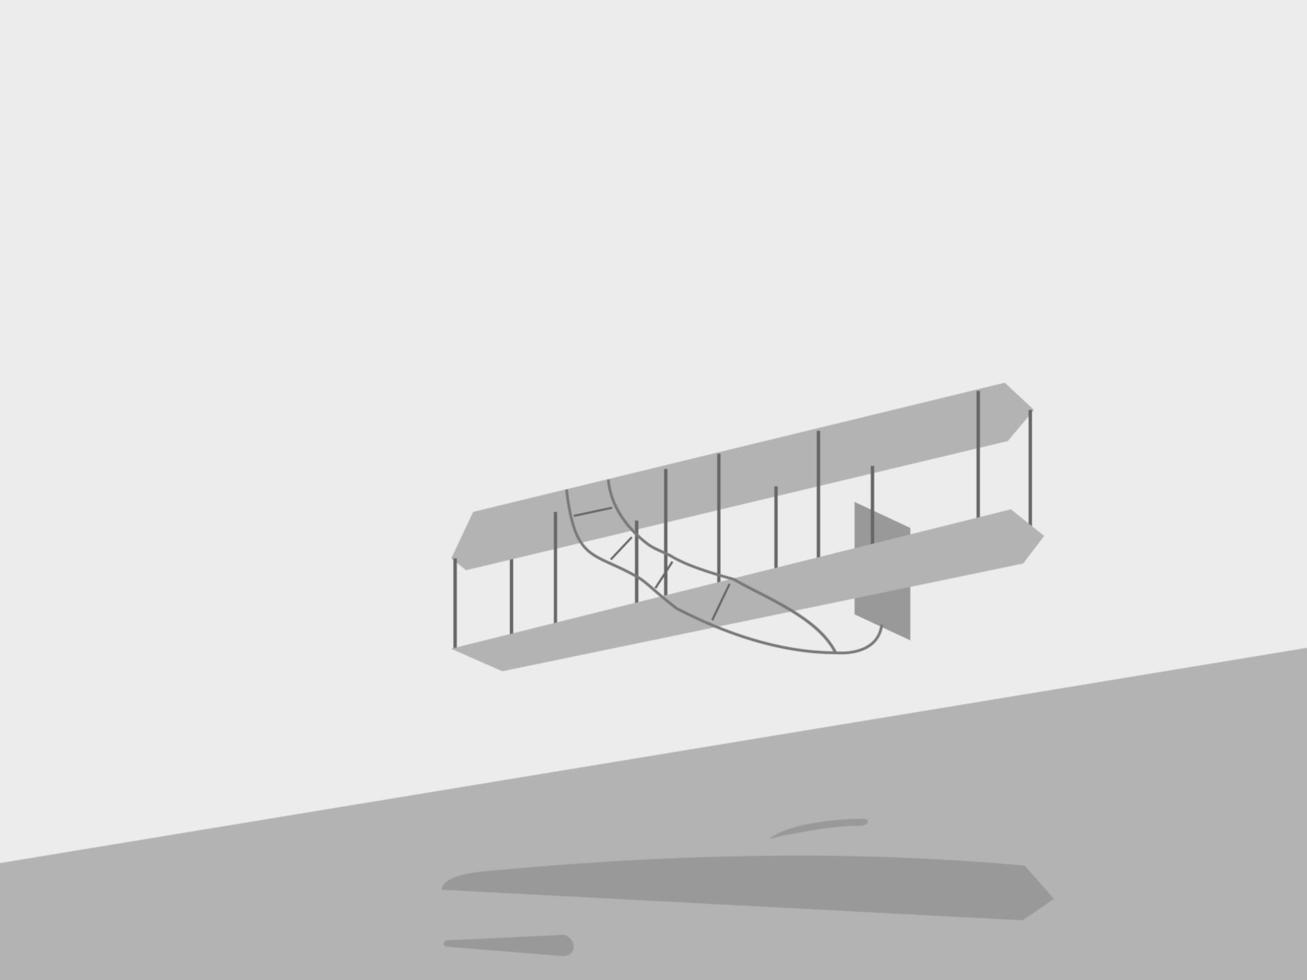 wright brothers day vector illustration flat design